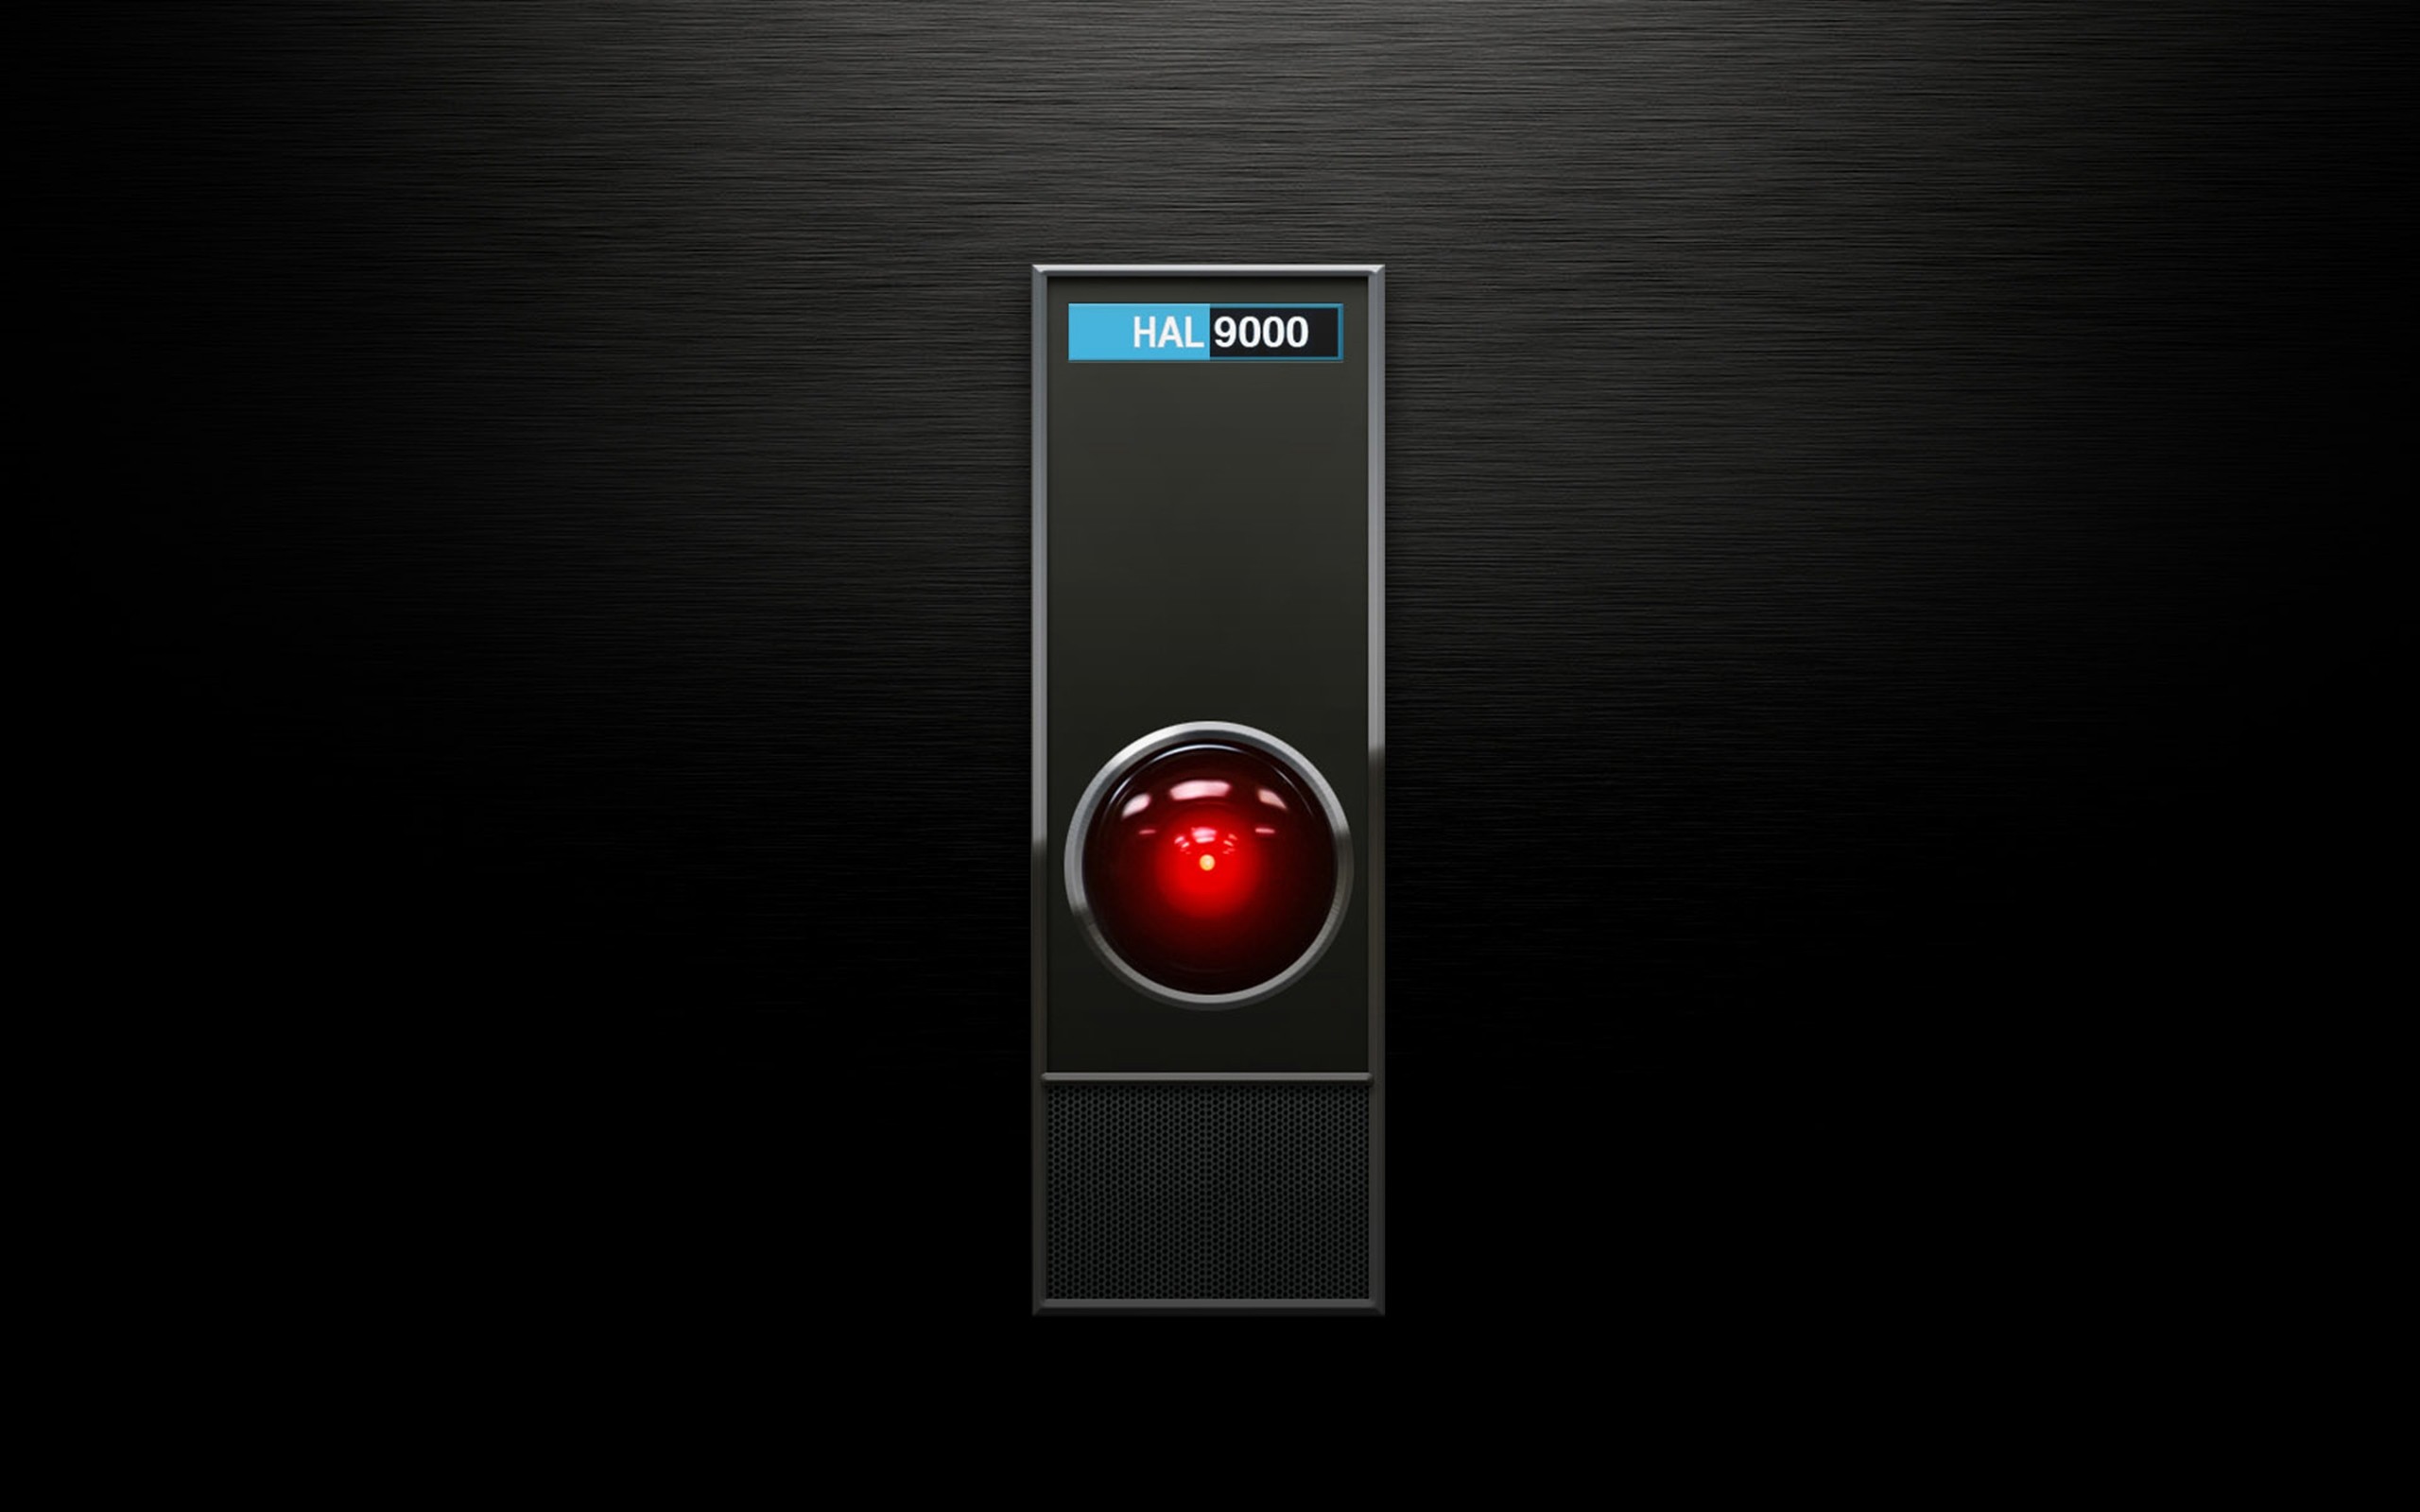 General 2560x1600 2001: A Space Odyssey HAL 9000 movies Stanley Kubrick science fiction computer